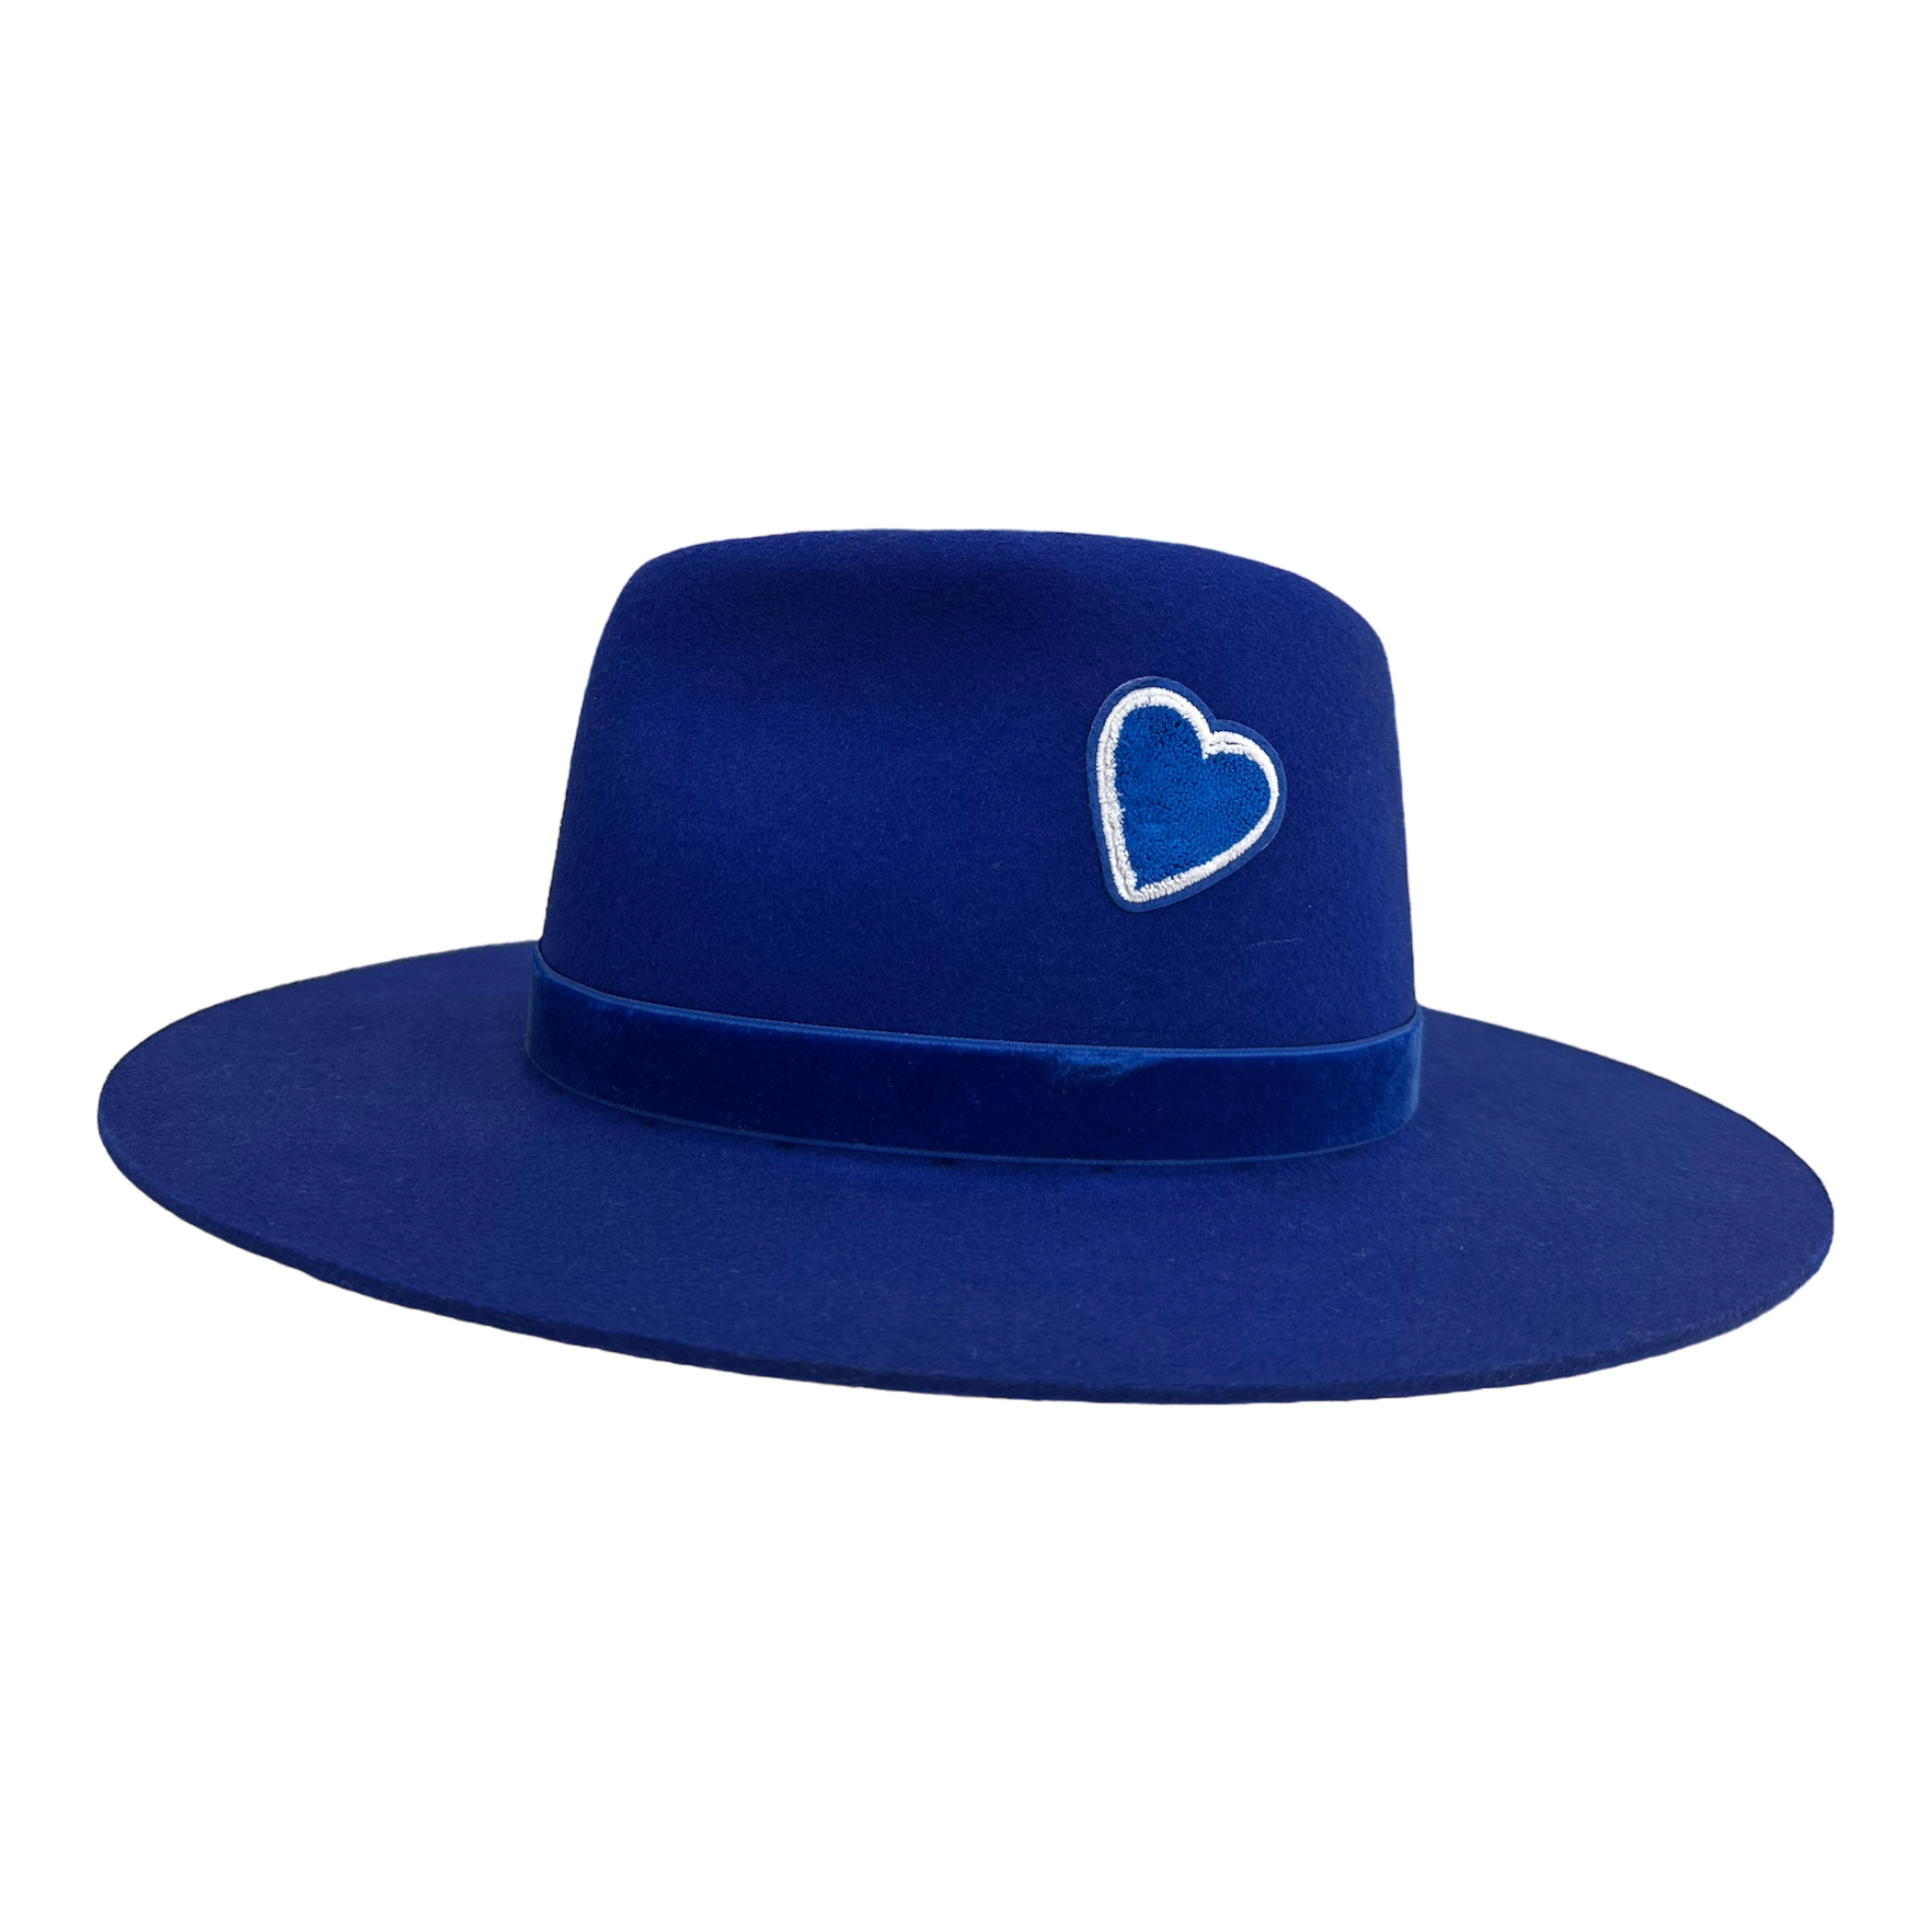 Amore Mio - Adult Fedora Hat By Bruce And Noah